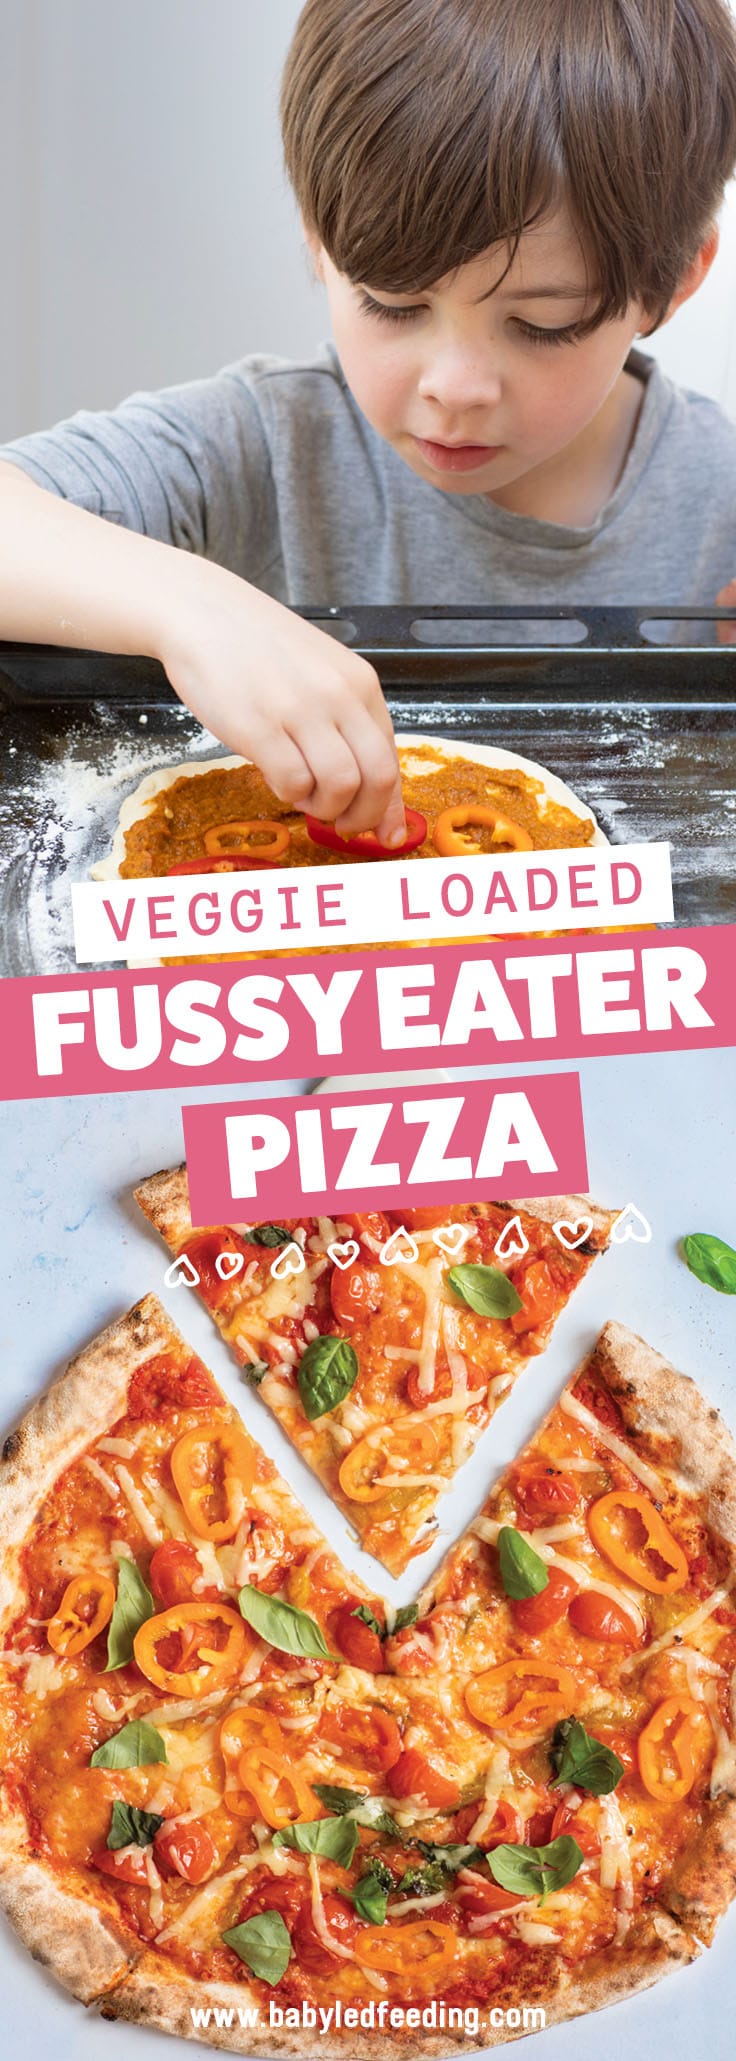 Juicy tomatoes and fresh sweet peppers give this healthy pizza a lightly sweet bite making it great for younger palates. Picky eater vegetable pizza is a family friendly nutritious recipe that only takes 10 minutes! #babyledweaning #pickyeater #toddlerfood #pizza #familyfood #refinedsugarfree 